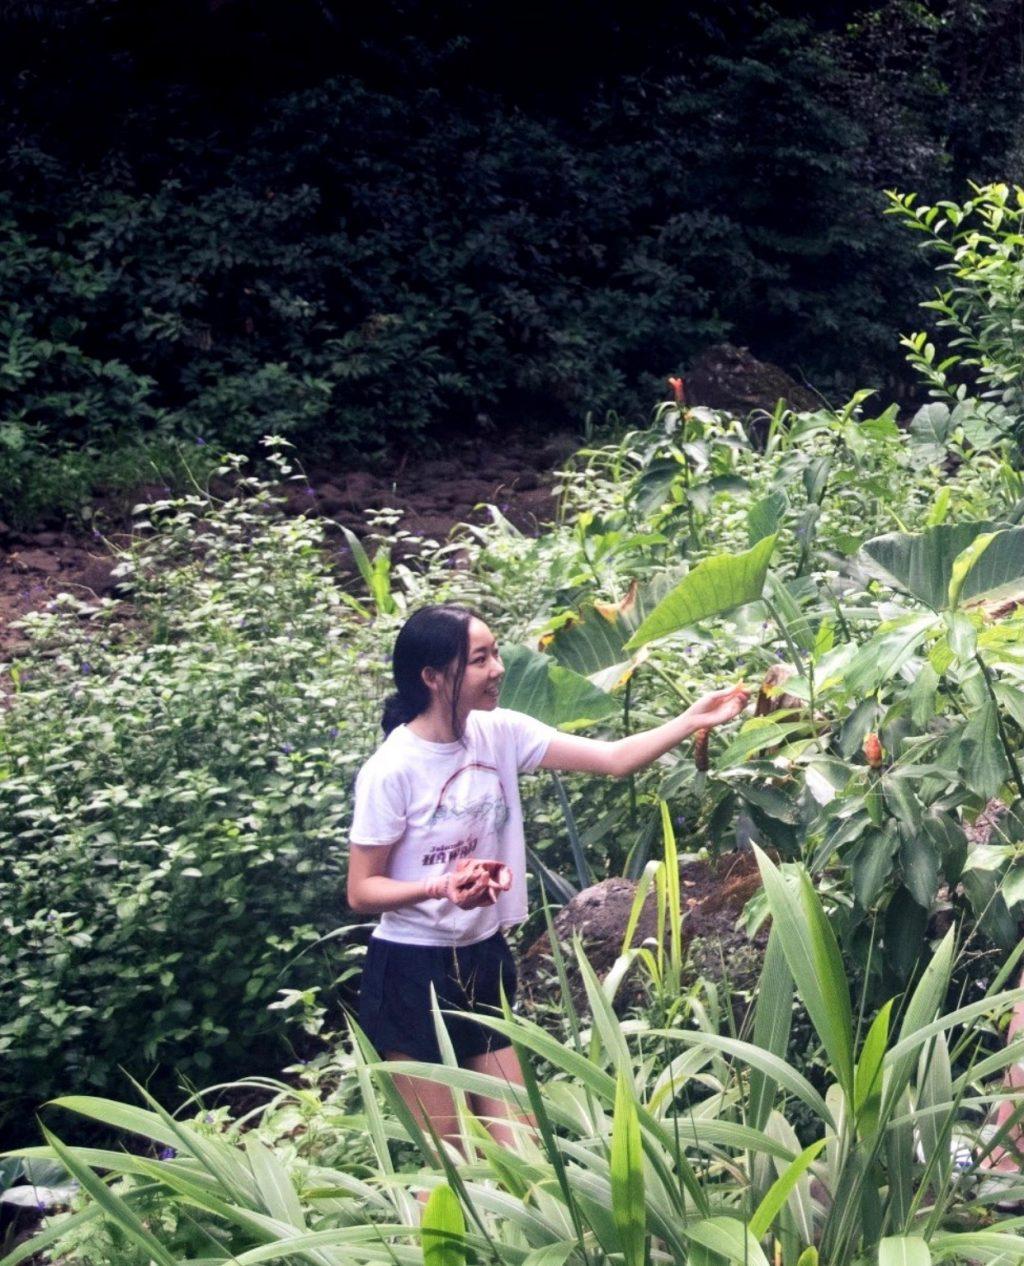 Elias takes a break from tending to the land to show her friends a beautiful flower in Waimea Valley, Hawai'i in July 2019. Elias said the service trip changed her life and strengthened her relationship with God.